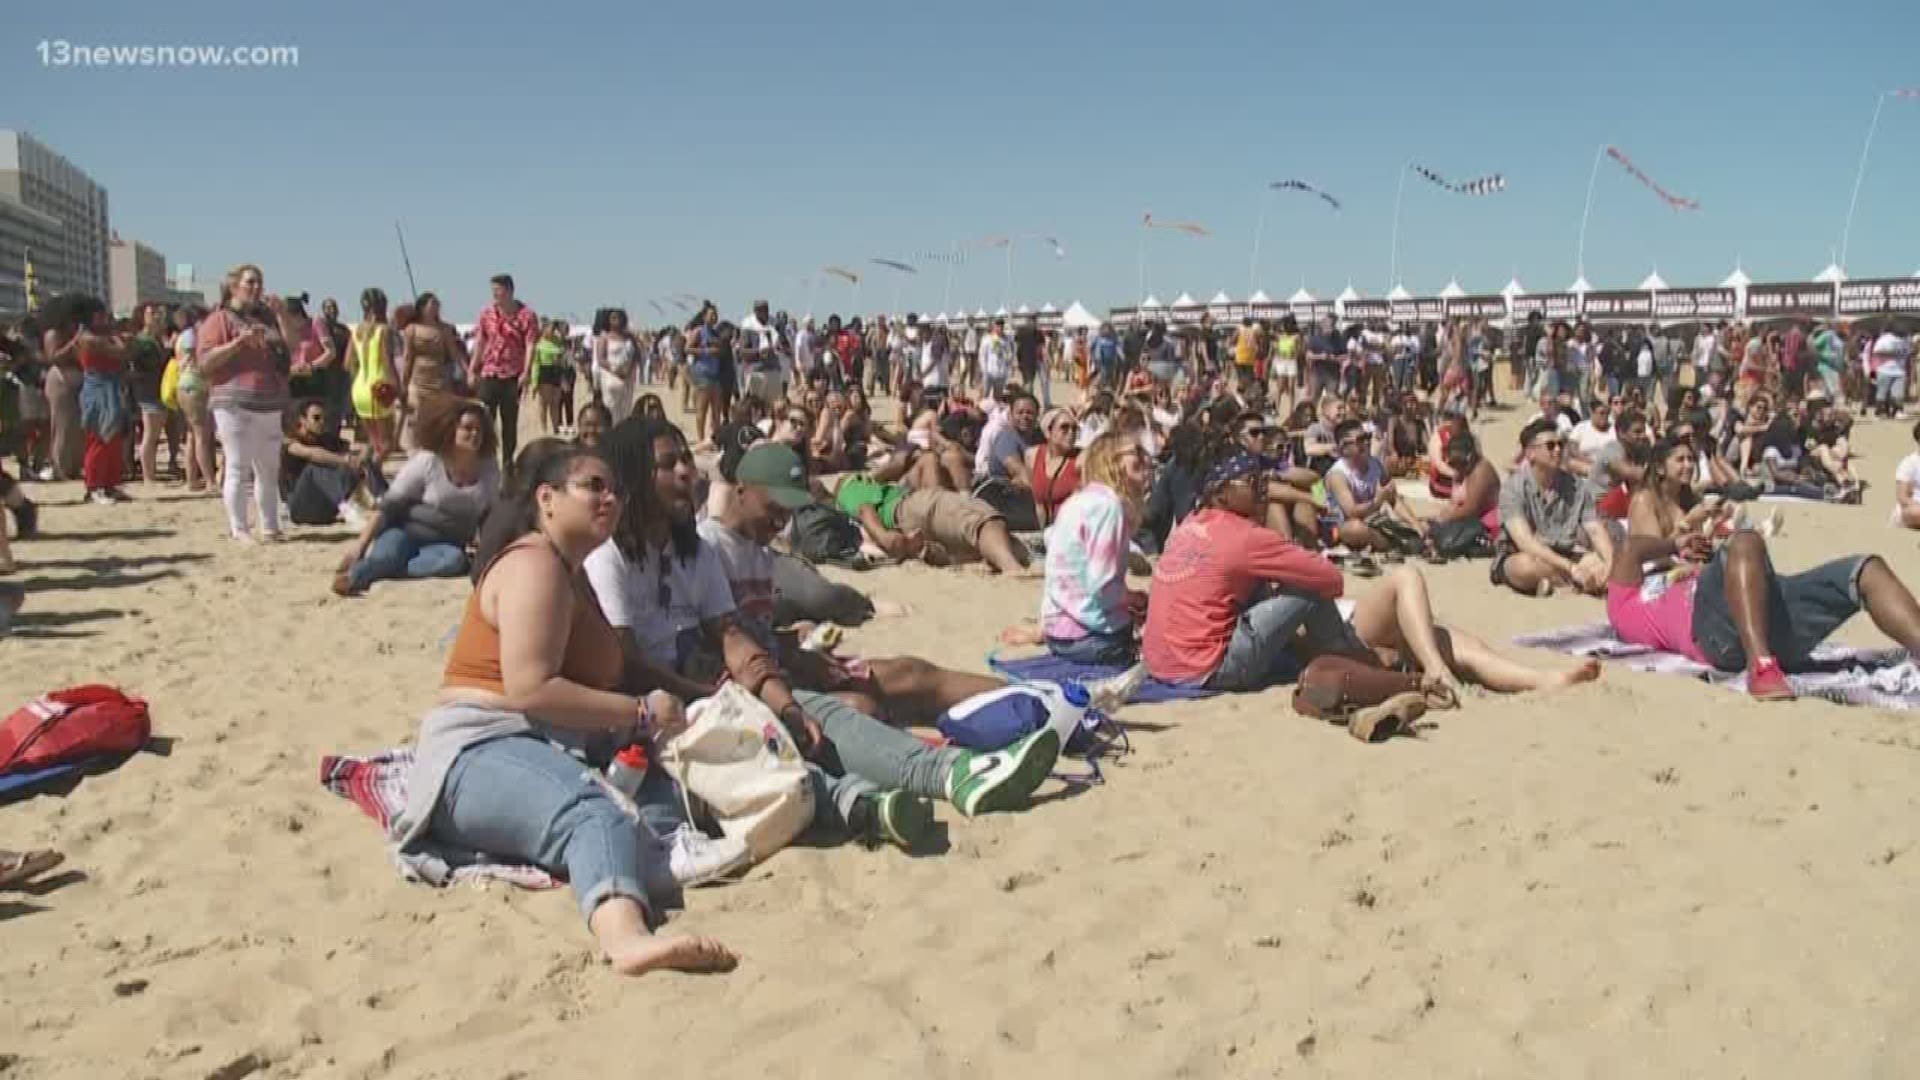 Va. Beach uses SITW festival to woo business - Virginia Business